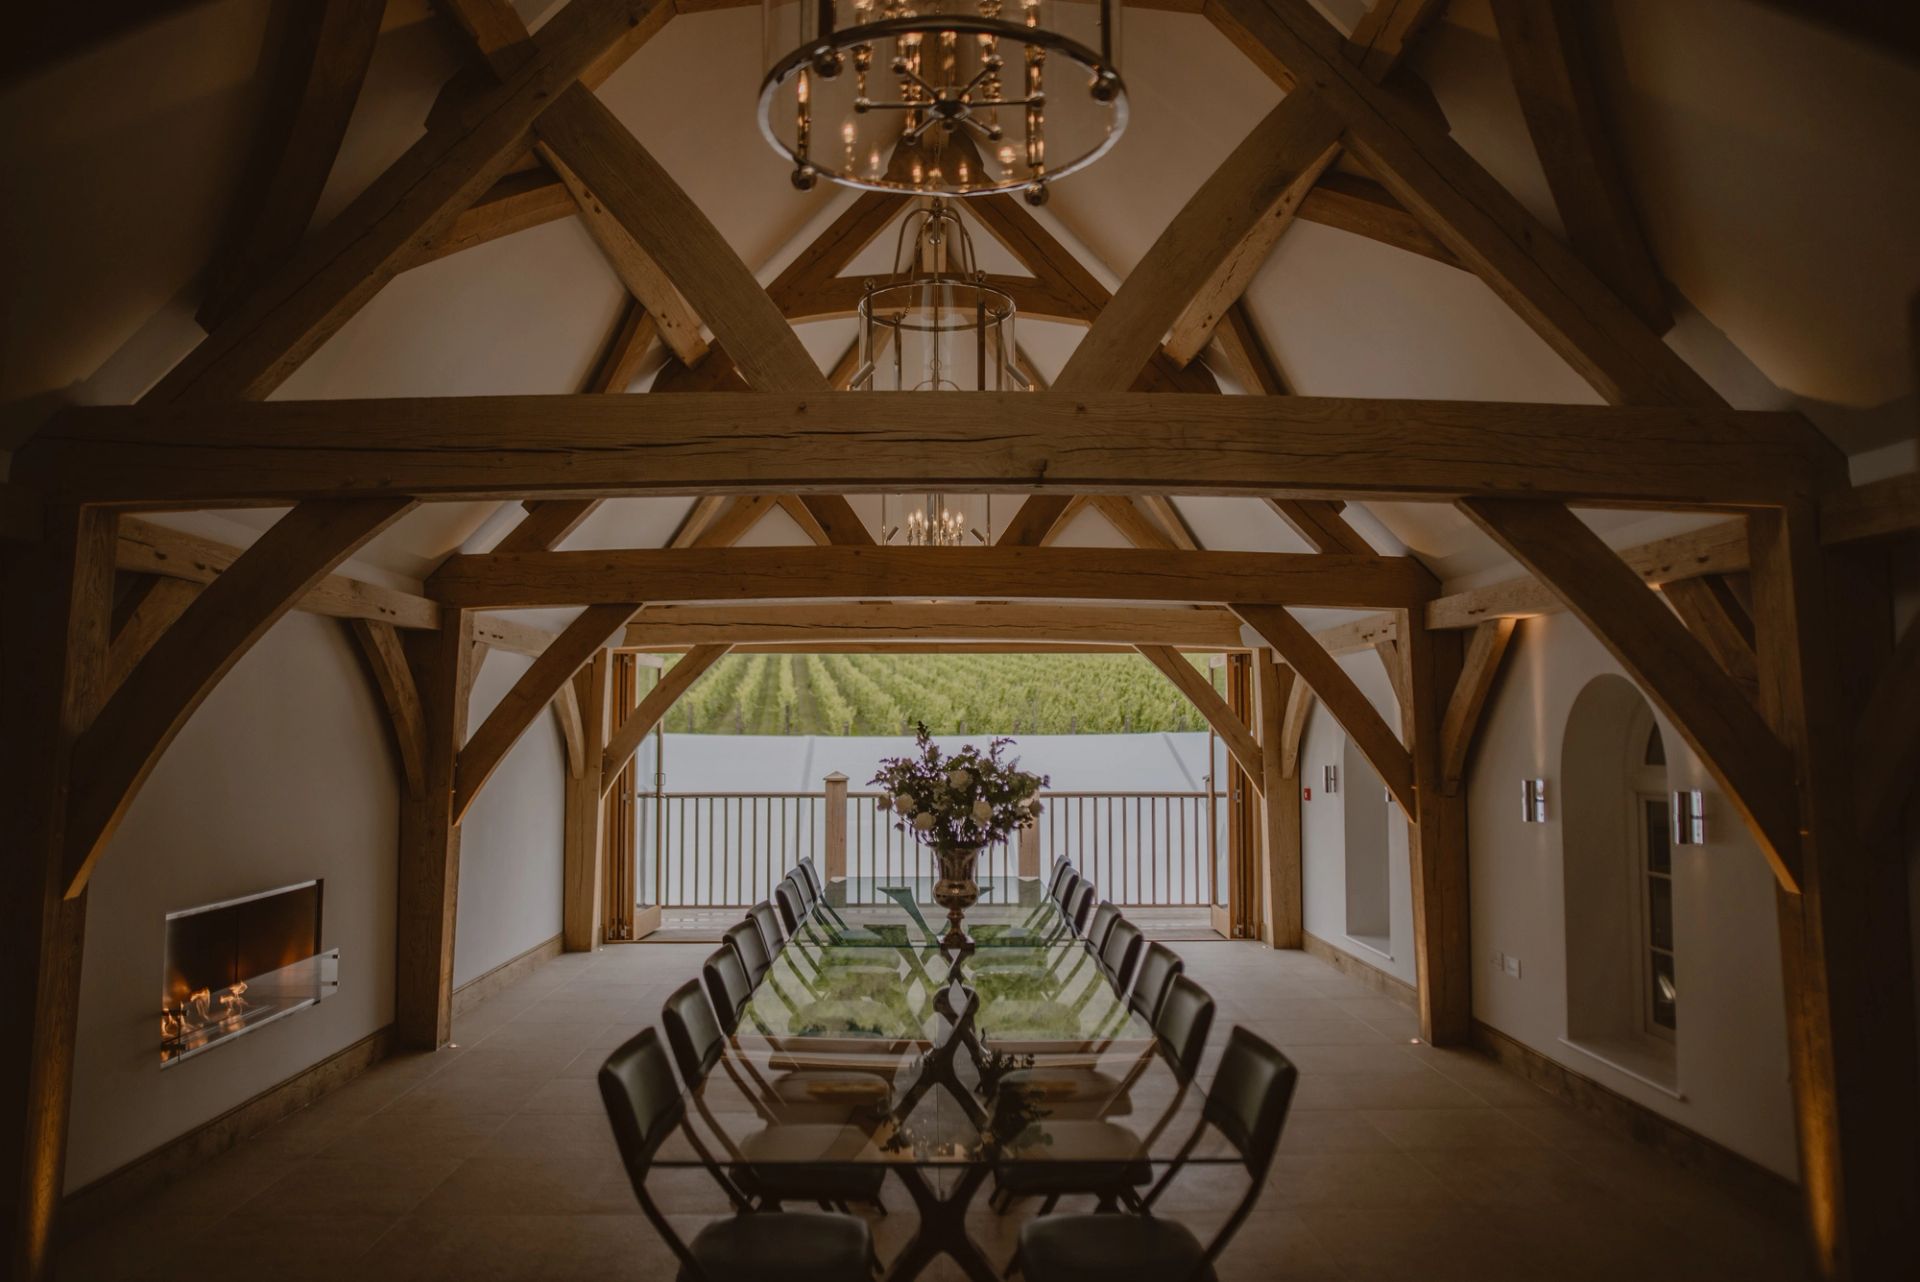 Dining room with wooden beams